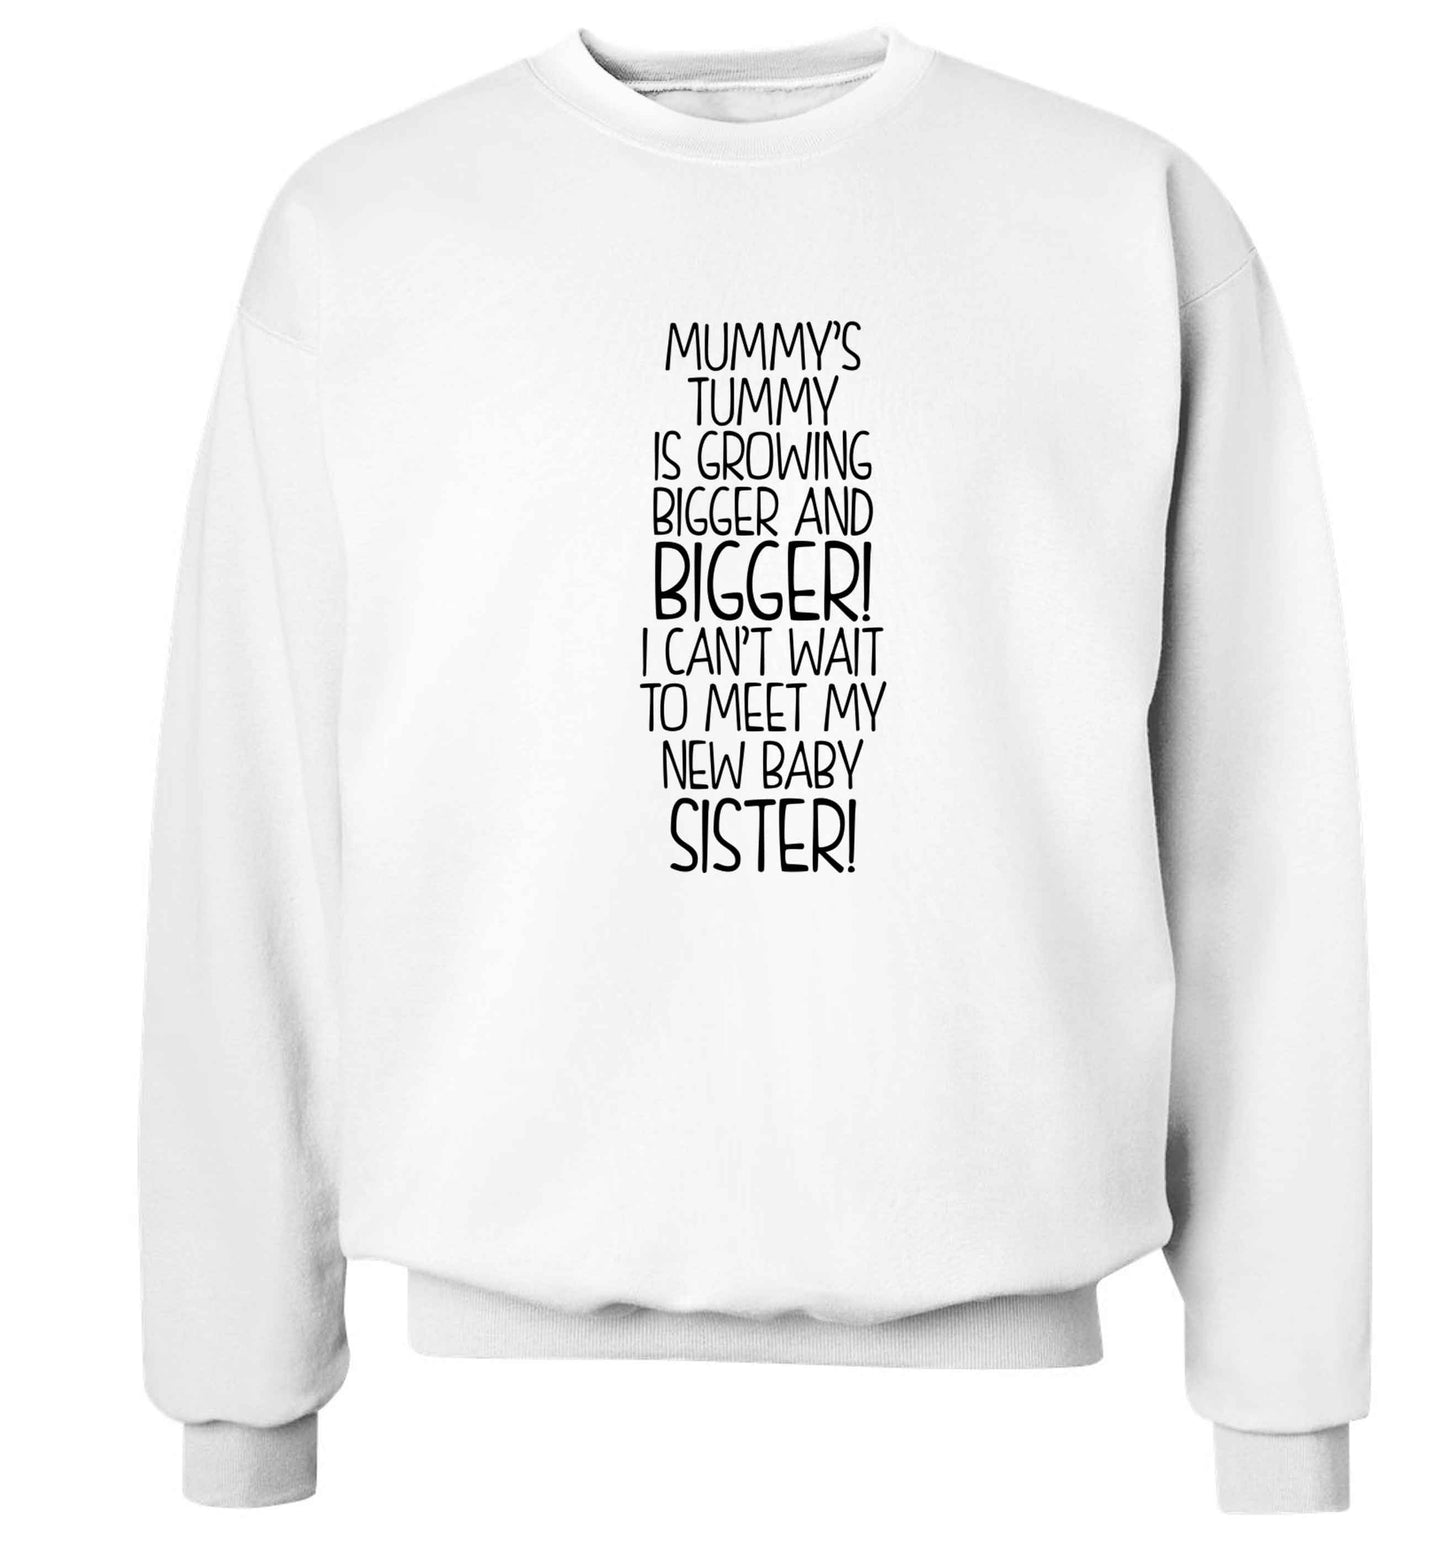 Mummy's tummy is growing bigger and bigger I can't wait to meet my new baby sister! Adult's unisex white Sweater 2XL